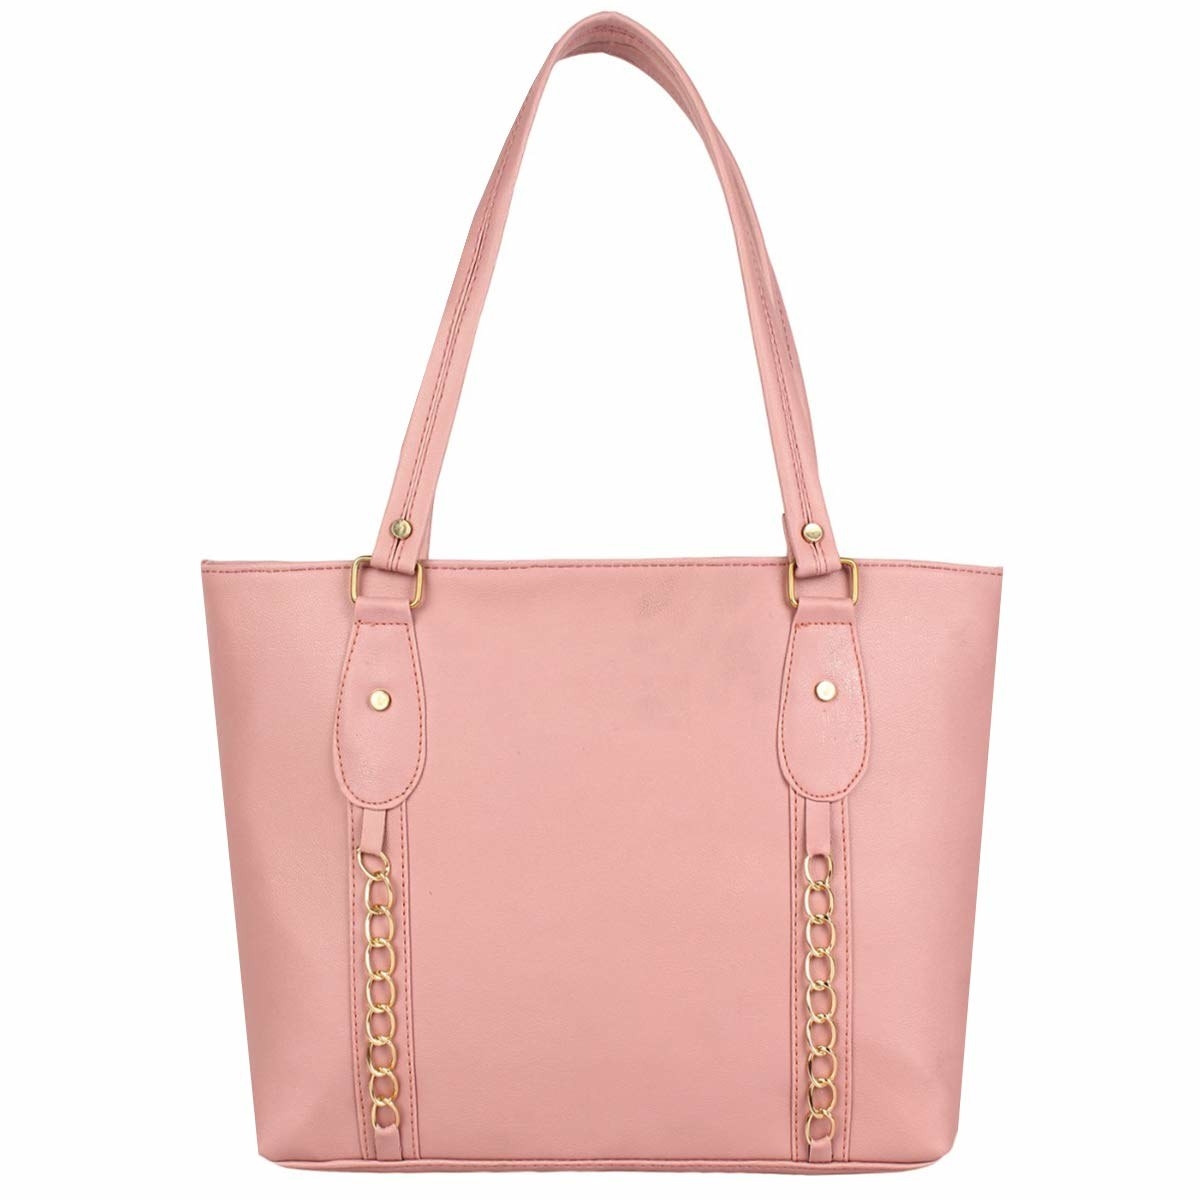 Nordstrom Rack's Weekend Flash Event Has the Chicest Valentine's Day Bags  From Kate Spade, Longchamp & More Up to 75% Off